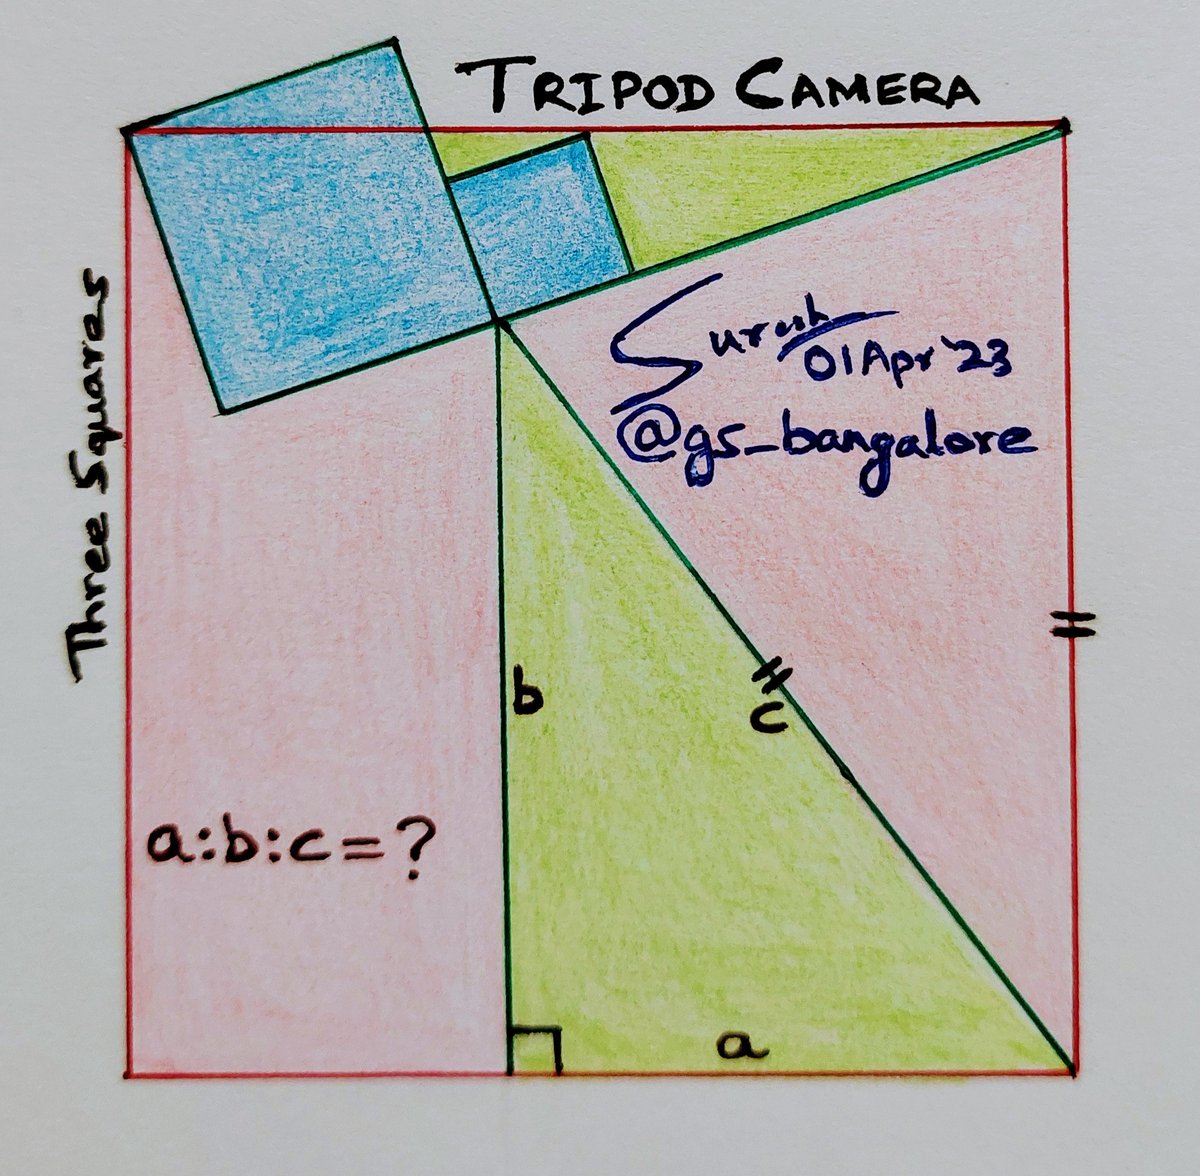 Tripod Camera. Three squares and several triangles, constrained.

a:b:c = ?

#square #triangle #geometry #geometrique #ratio #fraction #puzzle #Pythagoras #triple #thinking #logic #reasoning #today #mathteachers #math #teacher #mathematics #Algebra #highschool #students #learning